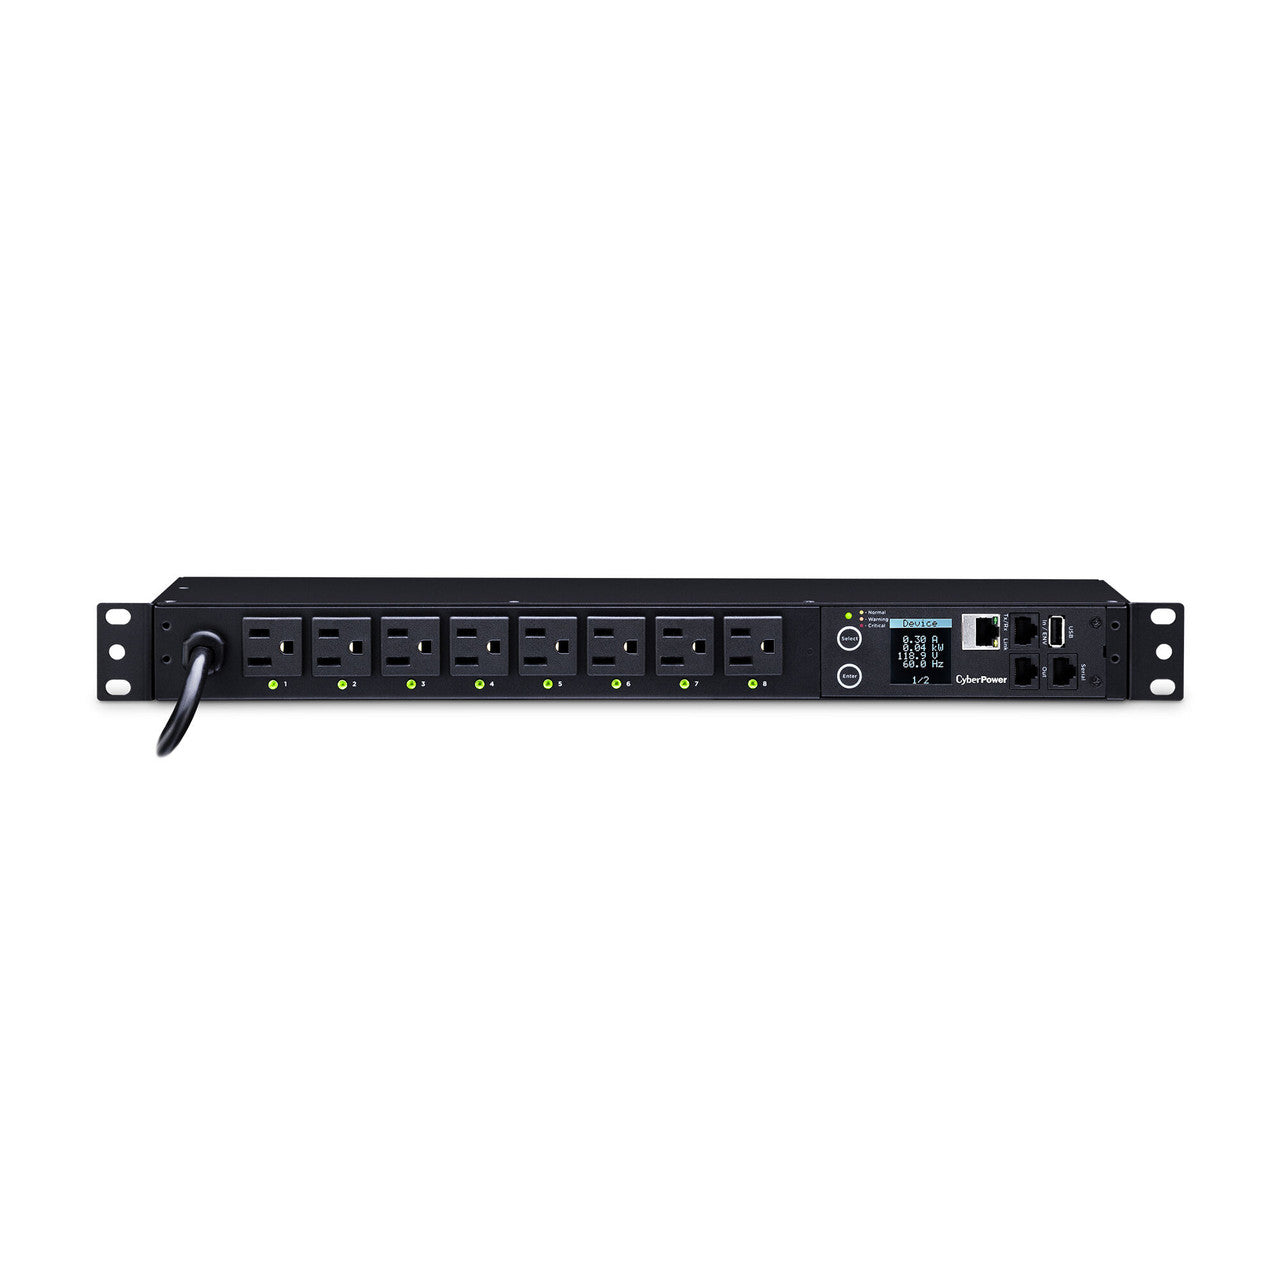 CyberPower PDU81001 SW MBO PDU 15A 120V Metered-by-Outlet Switched PDU NEMA Outlets 12ft cord 3yr Warranty